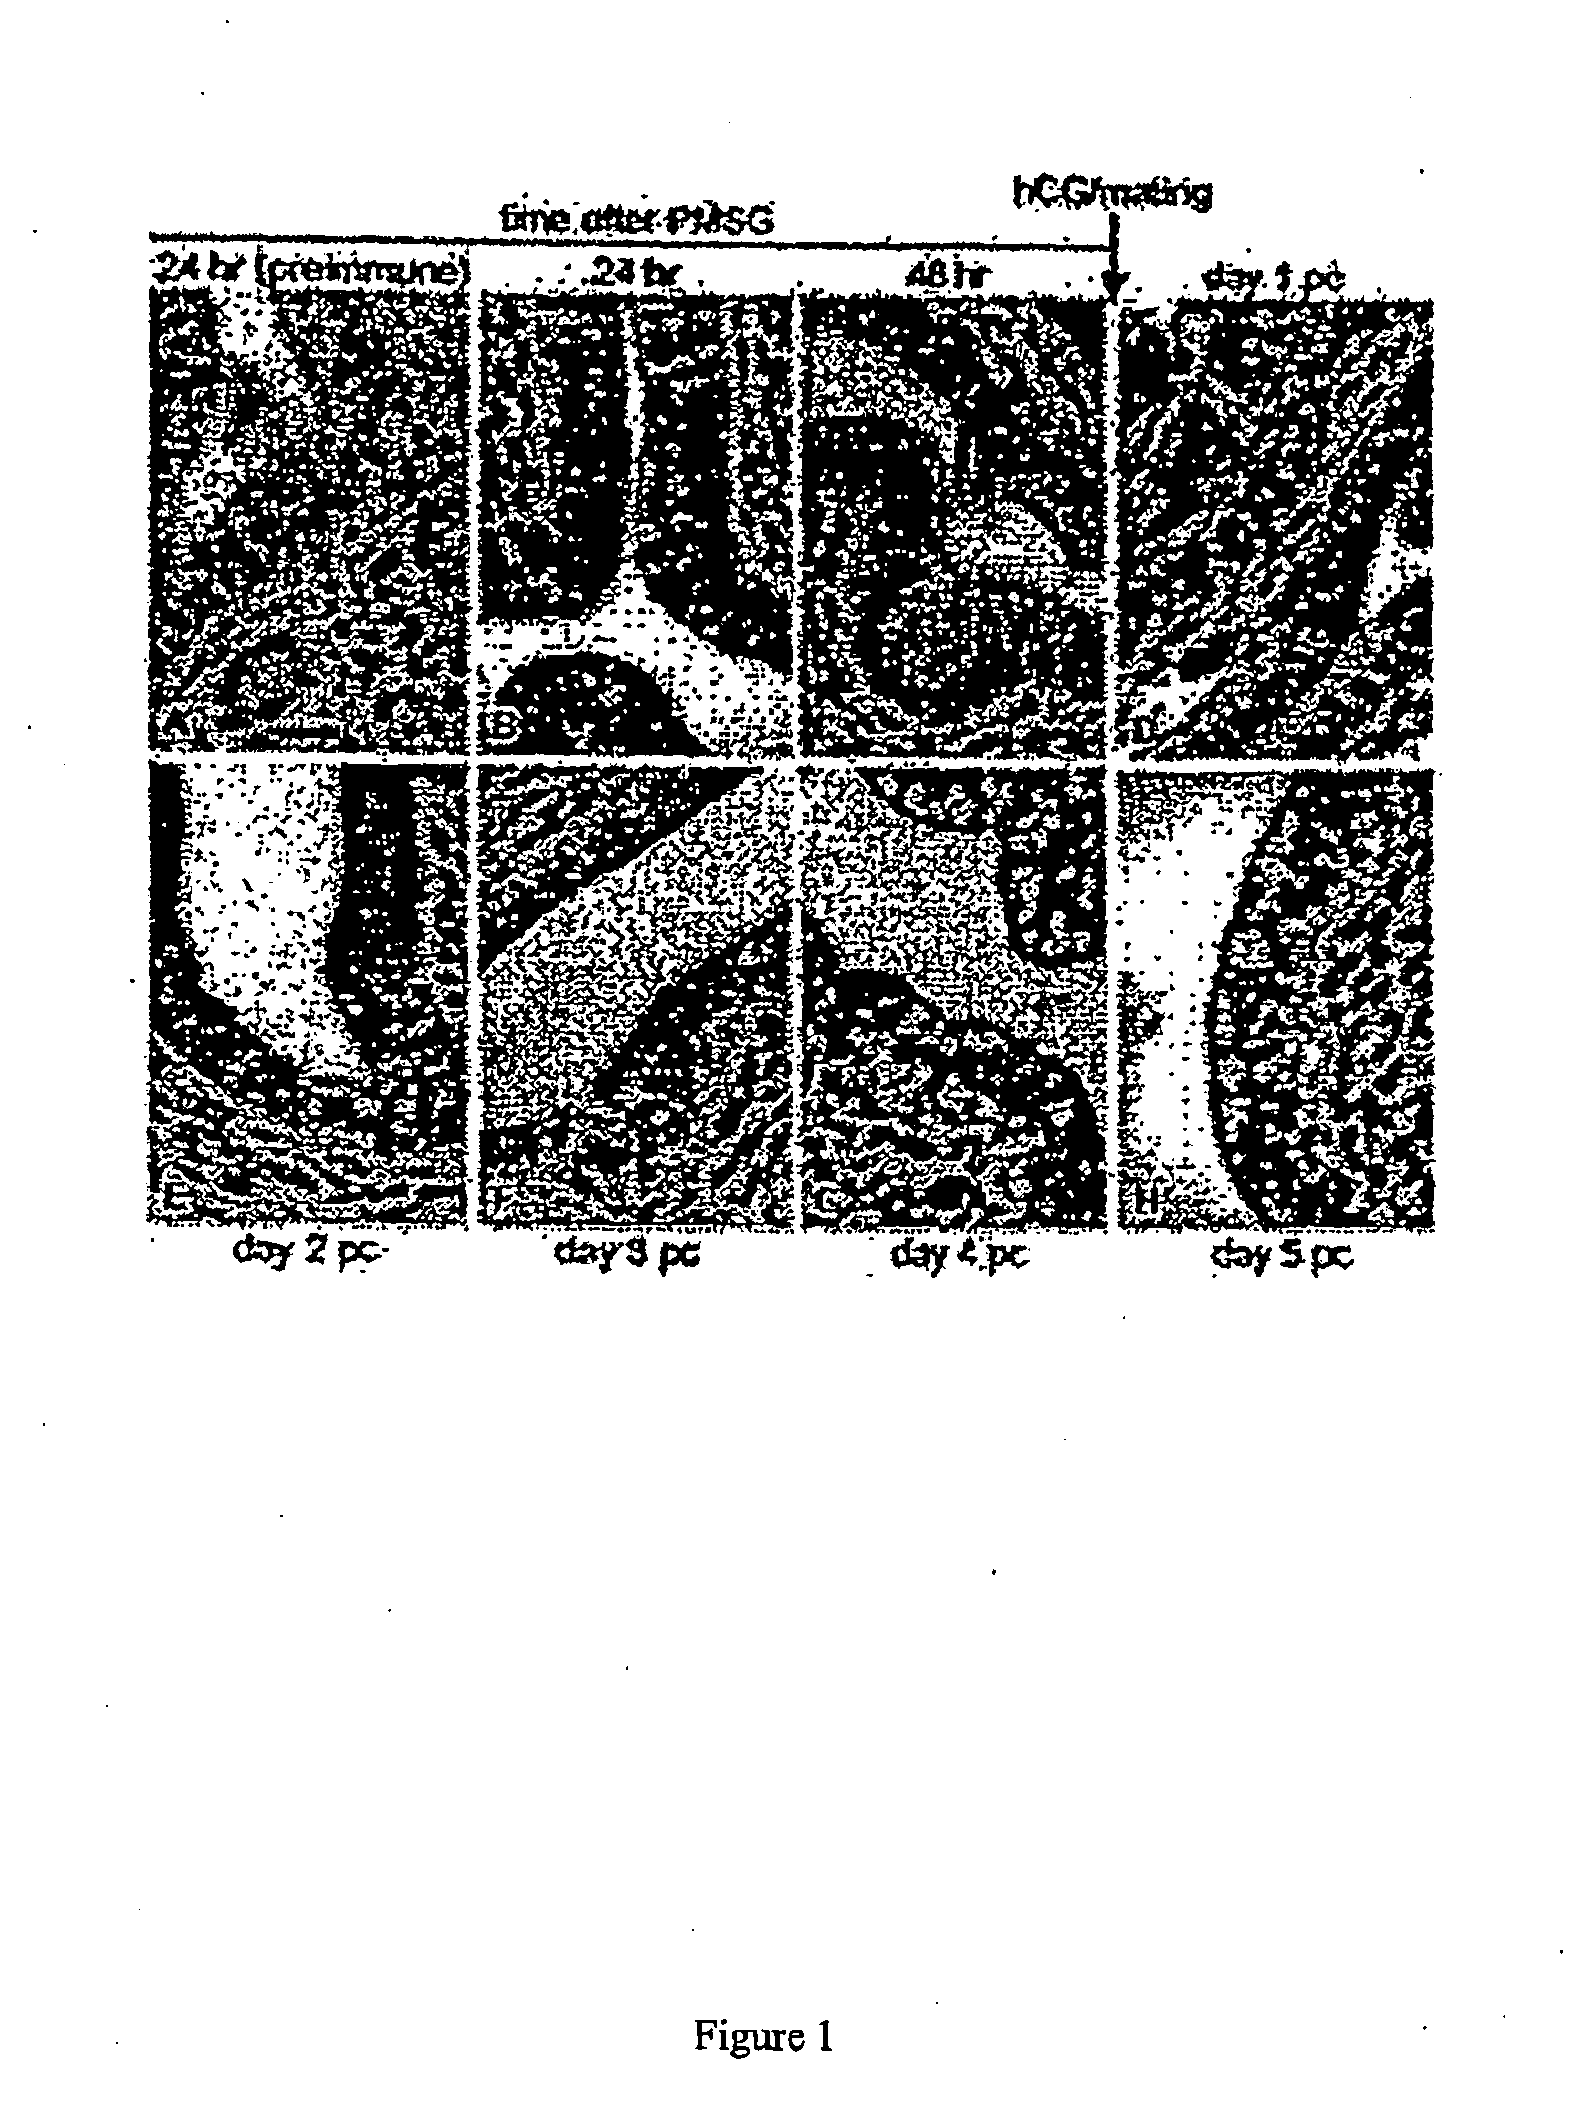 Methods for Diagnosis and Treatment of Endometrial Cancer